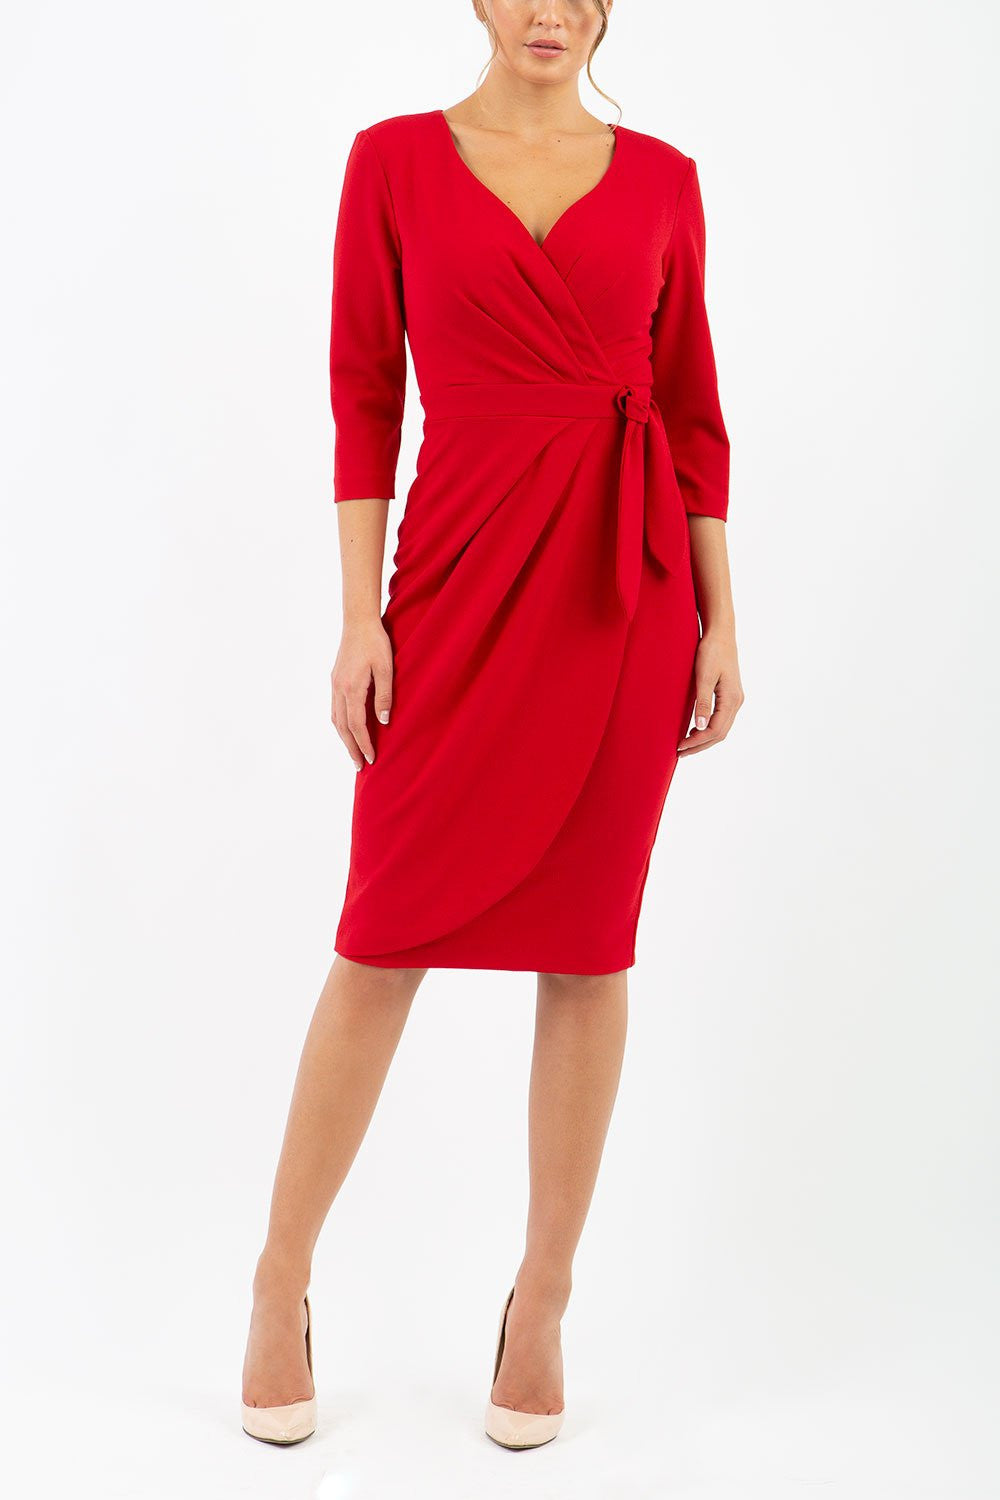 model wearing diva catwalk elan elegant red dress with 3 4 sleeves with a tie detail and asymmetrical closing front